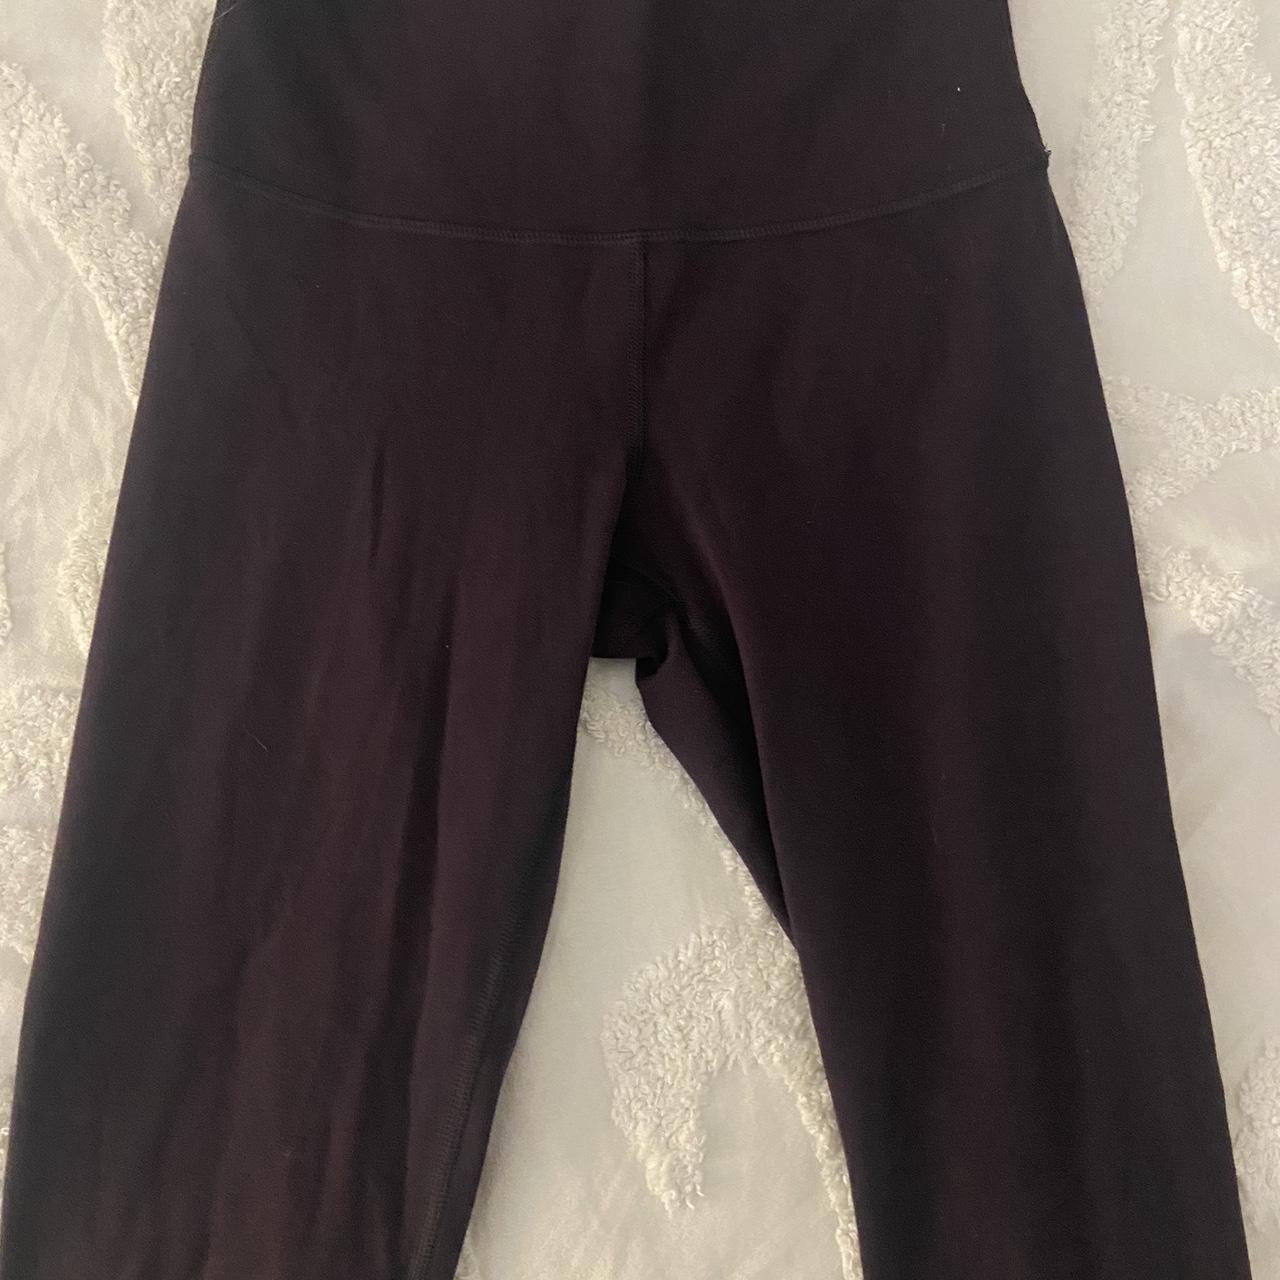 Lululemon leggings -tag ripped out -size 2/4 -great - Depop